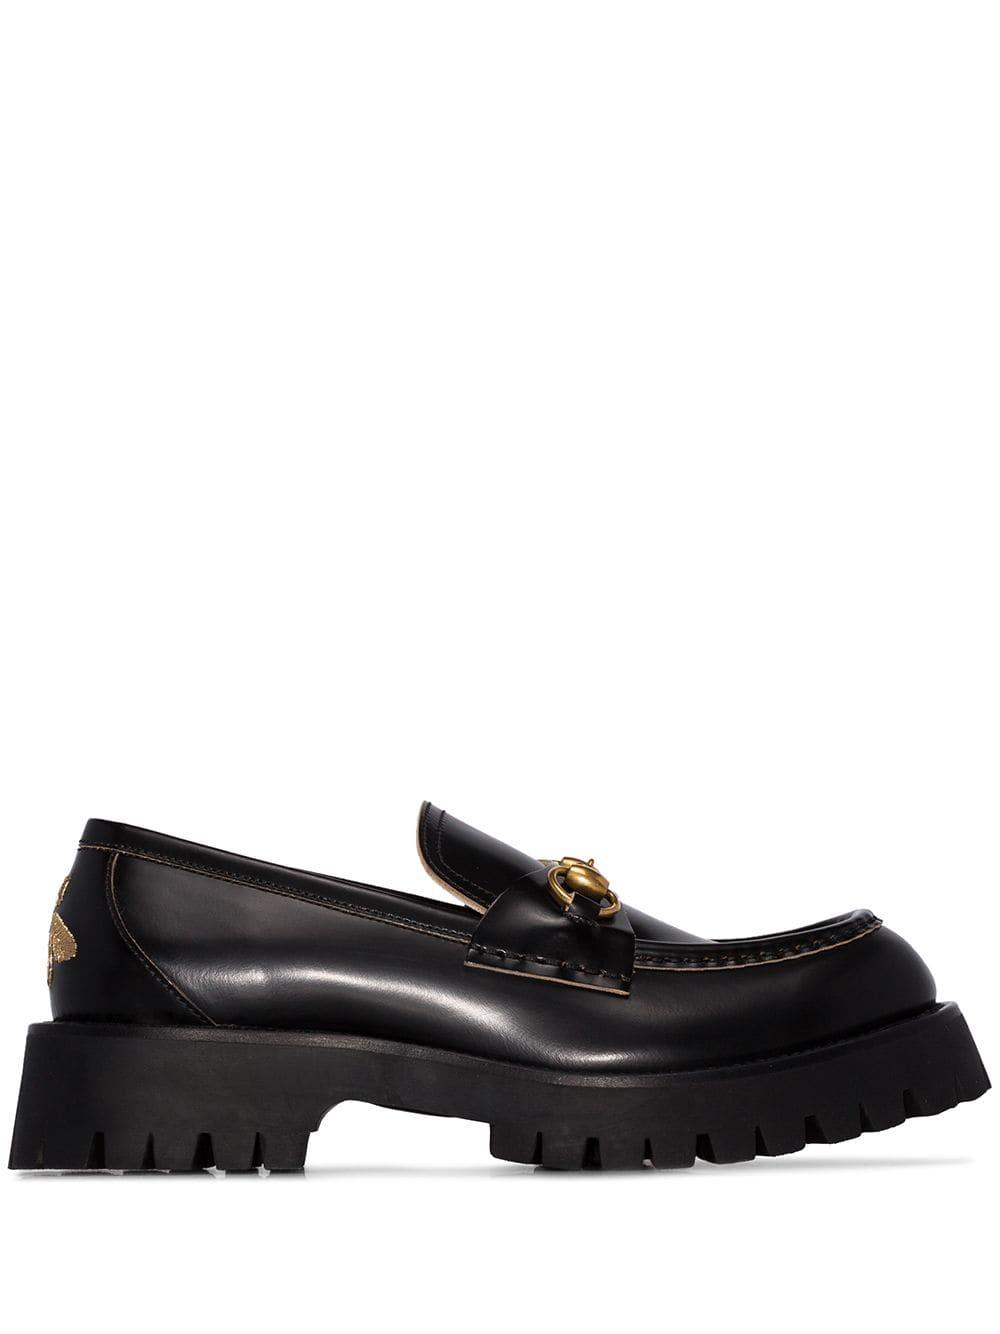 Gucci Leather Dsango Platform Loafers in Black - Lyst